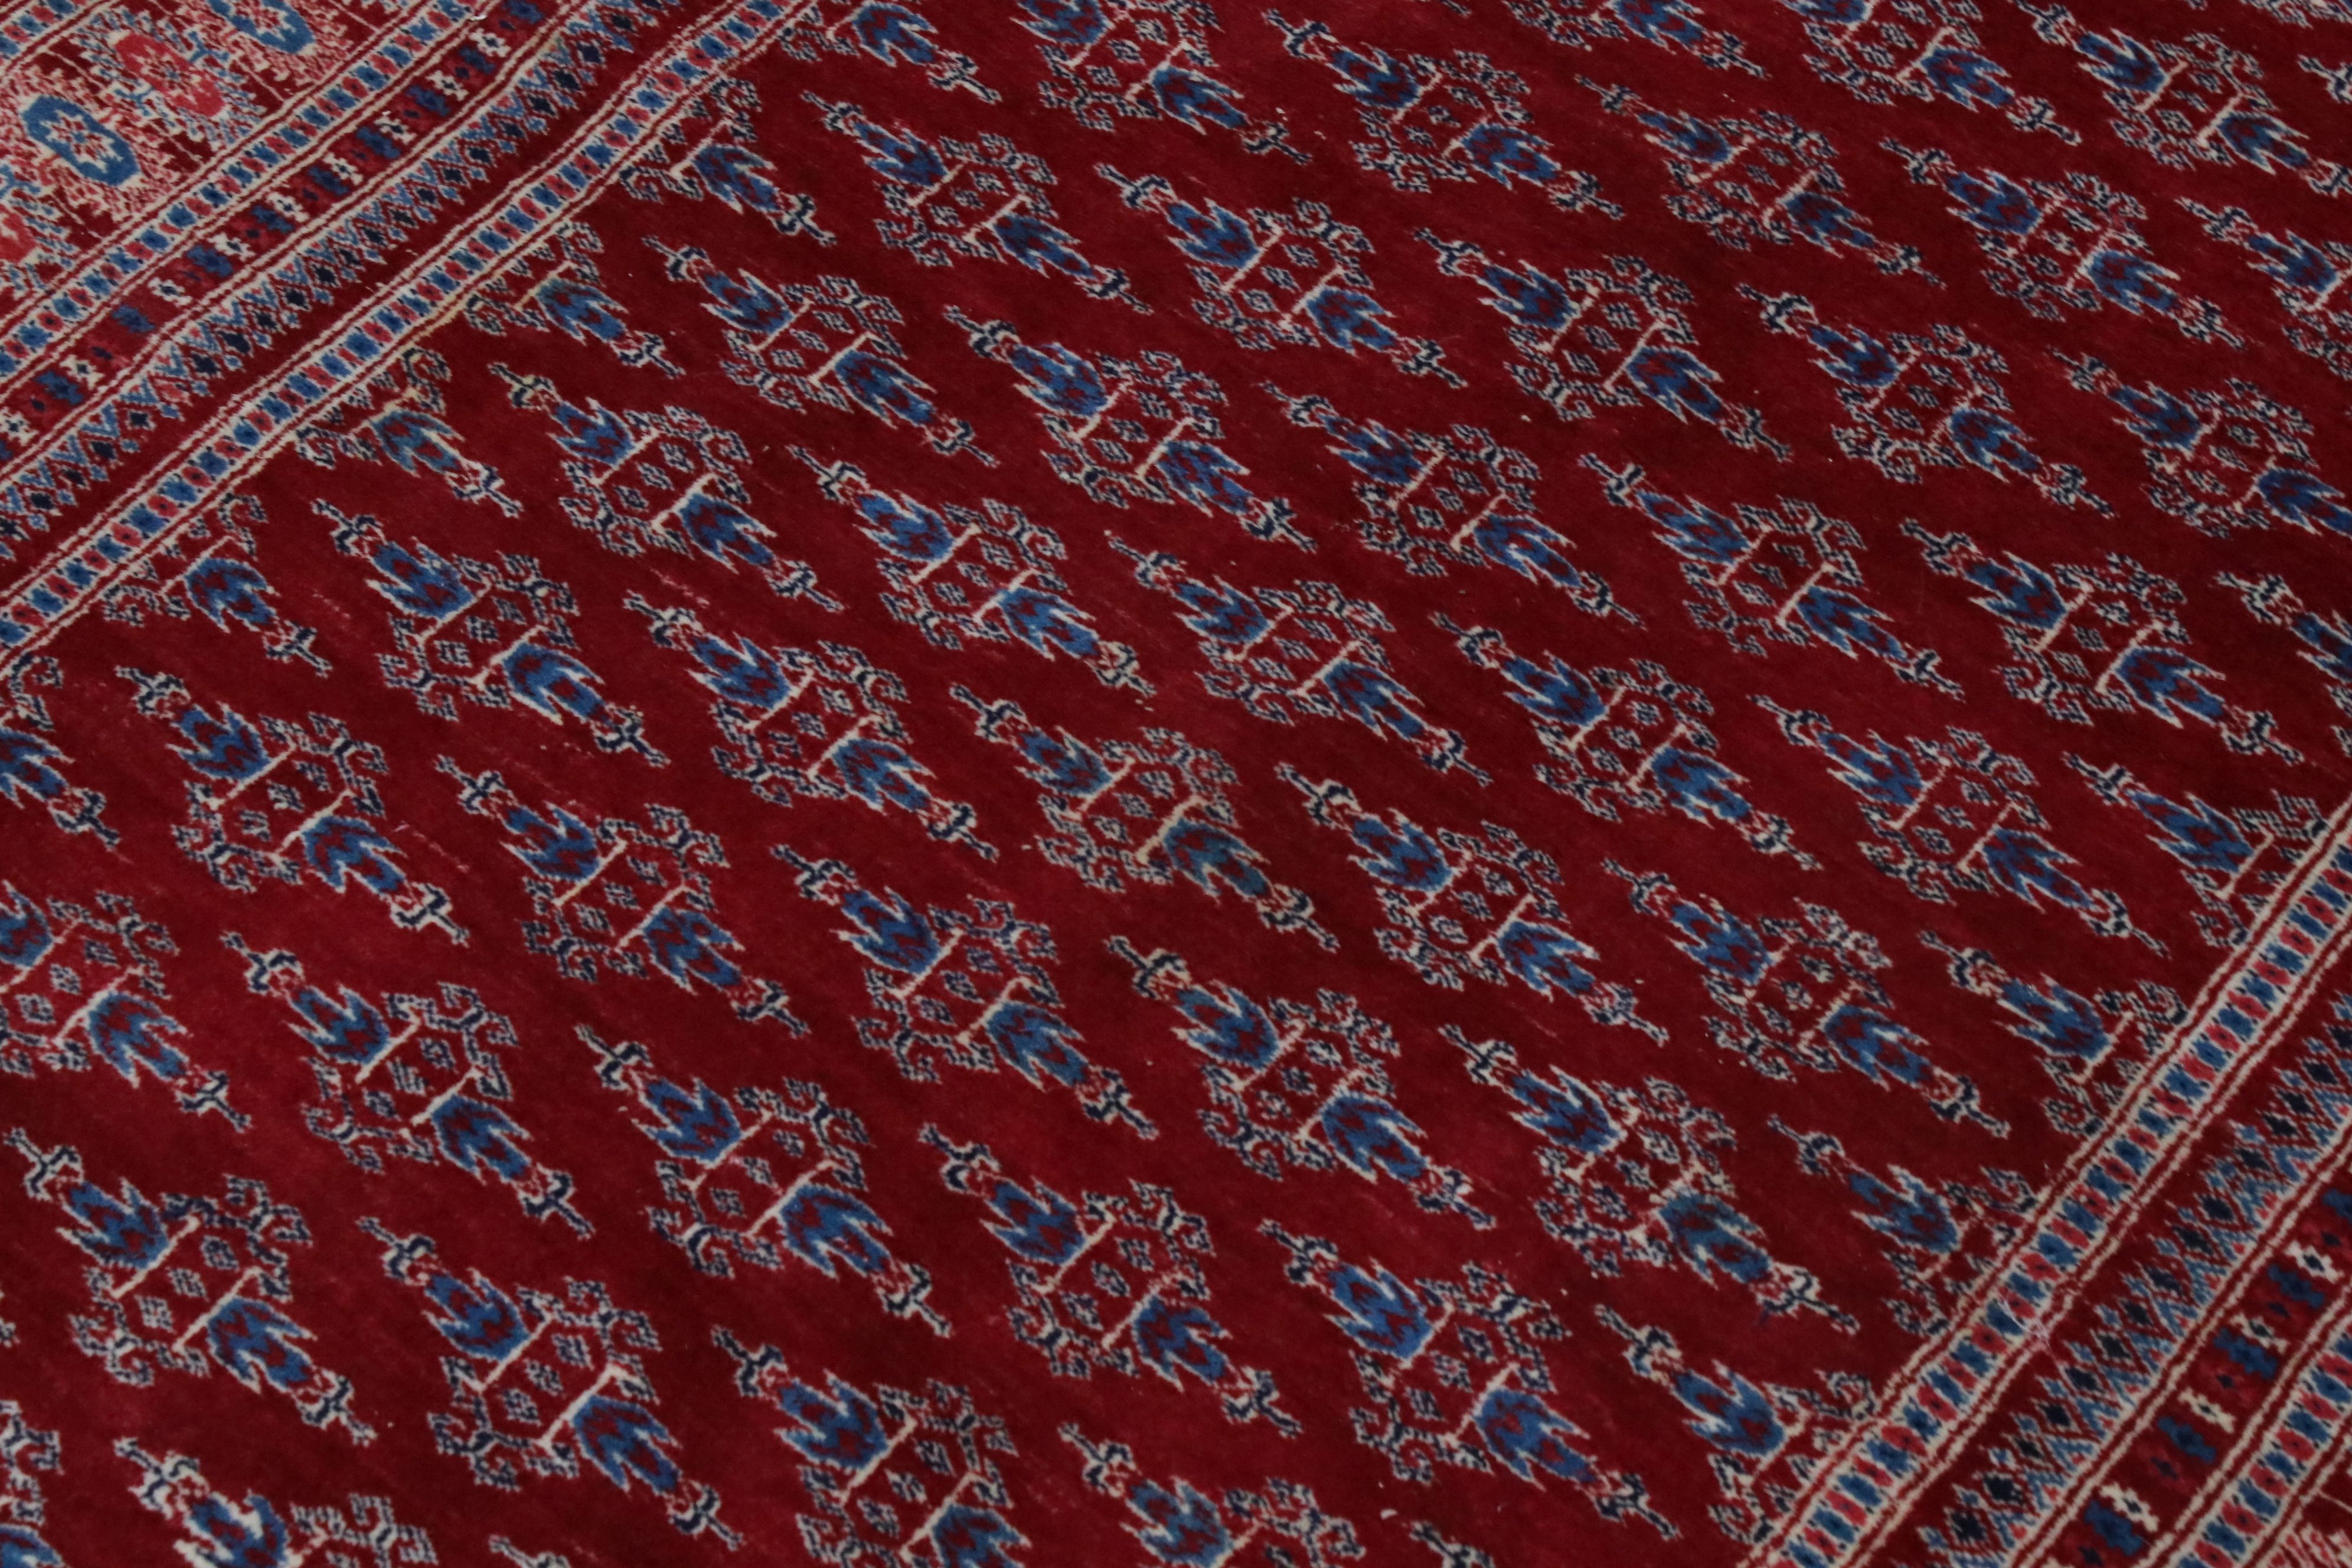 Eastern Red Ground Rug with Geometric pattern with a border, 184cms x 130cms - Image 3 of 4